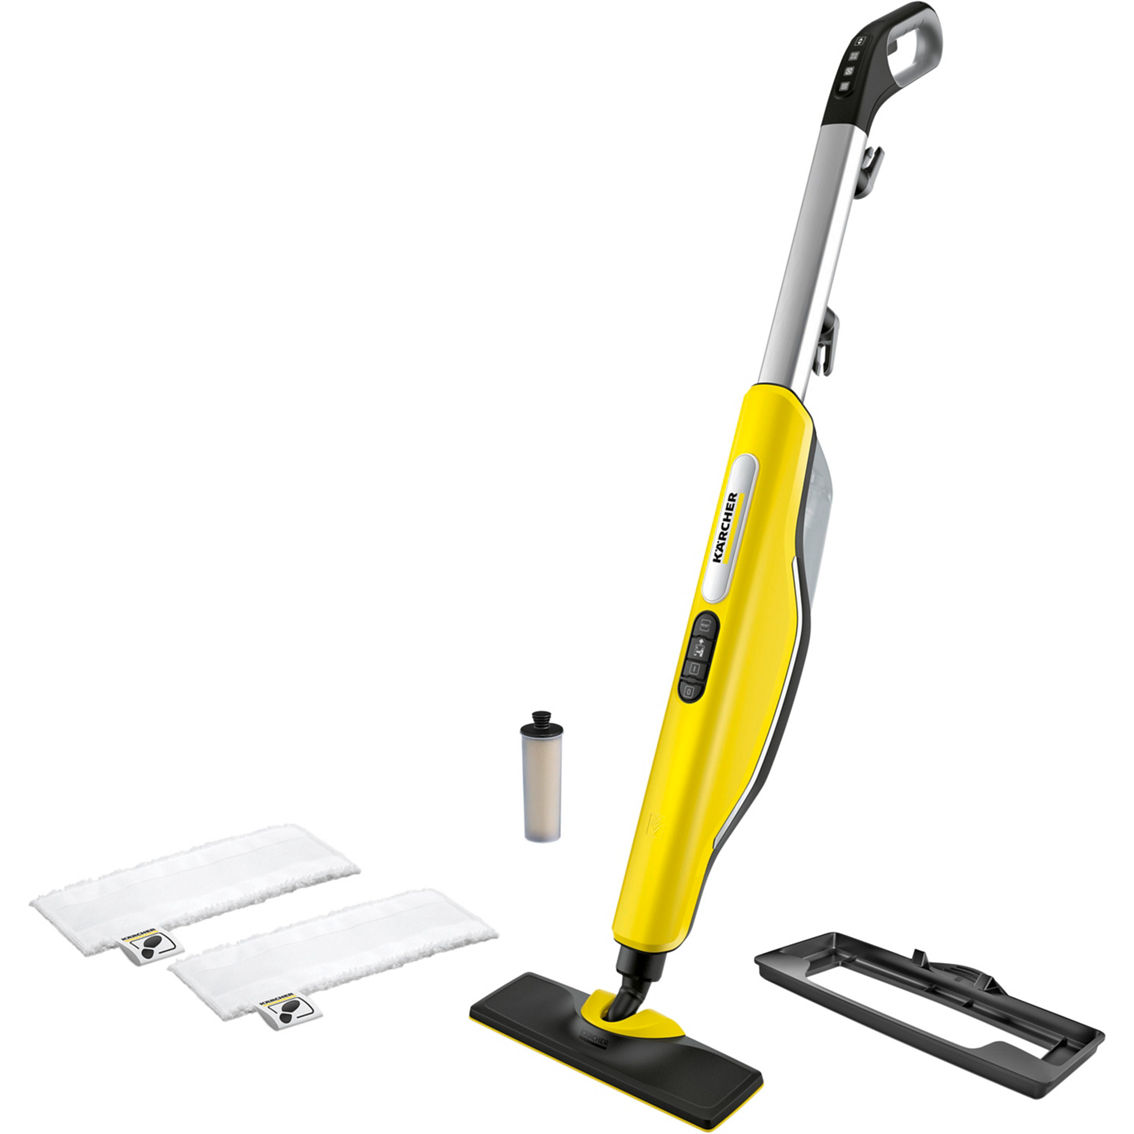 Karcher SC 3 Portable Multi Purpose Steam Cleaner with Hand and Floor Attachments - Image 2 of 10